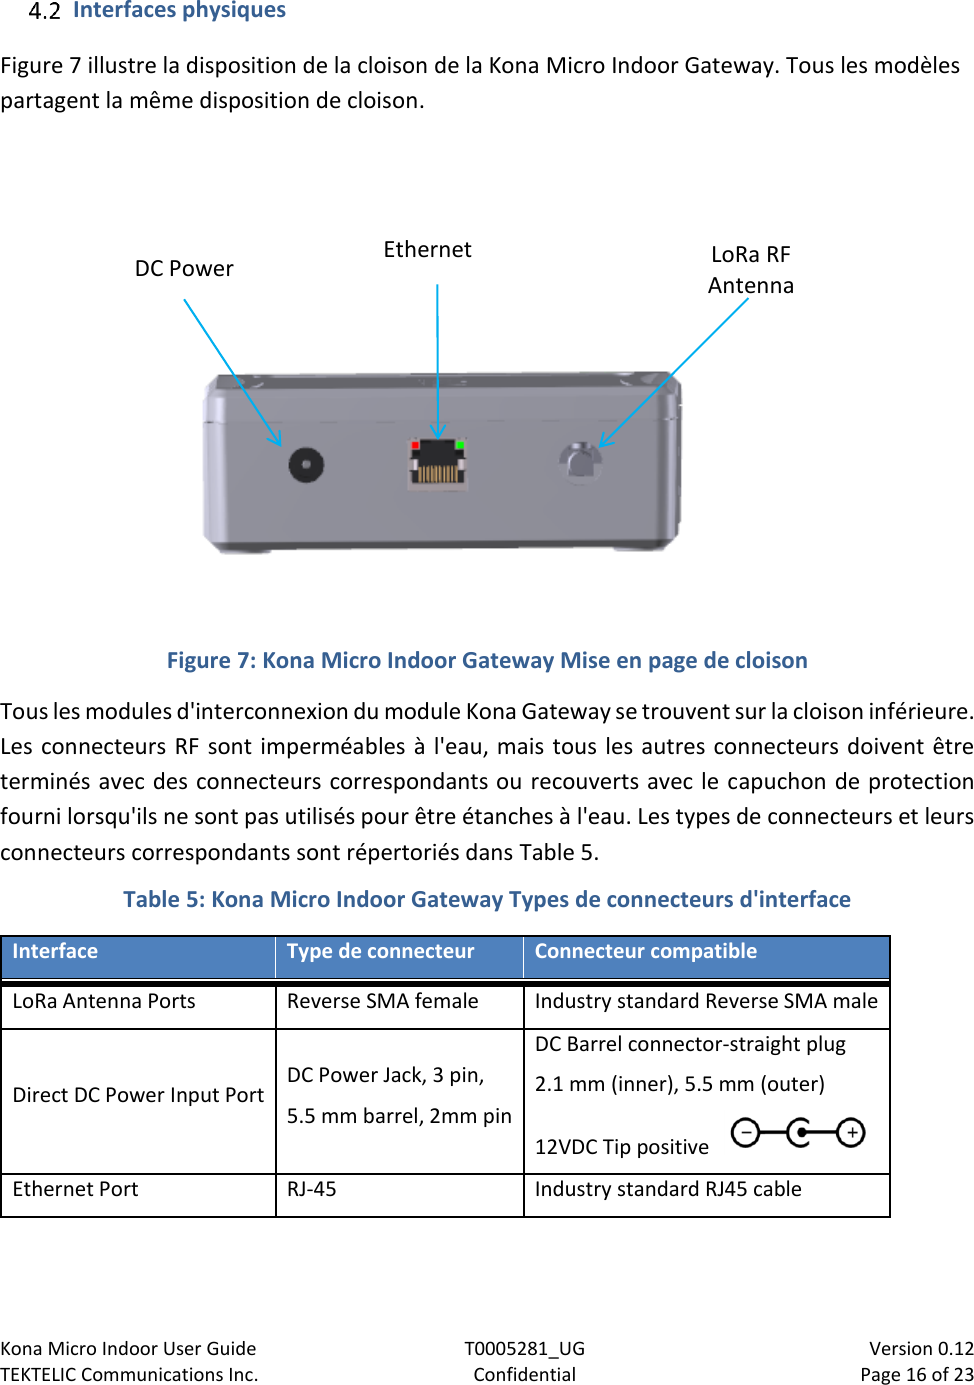 Page 16 of TEKTELIC Communications orporated T0005281 Kona micro outdoor gateway is a LoRa base station User Manual 2150 RRH SDS